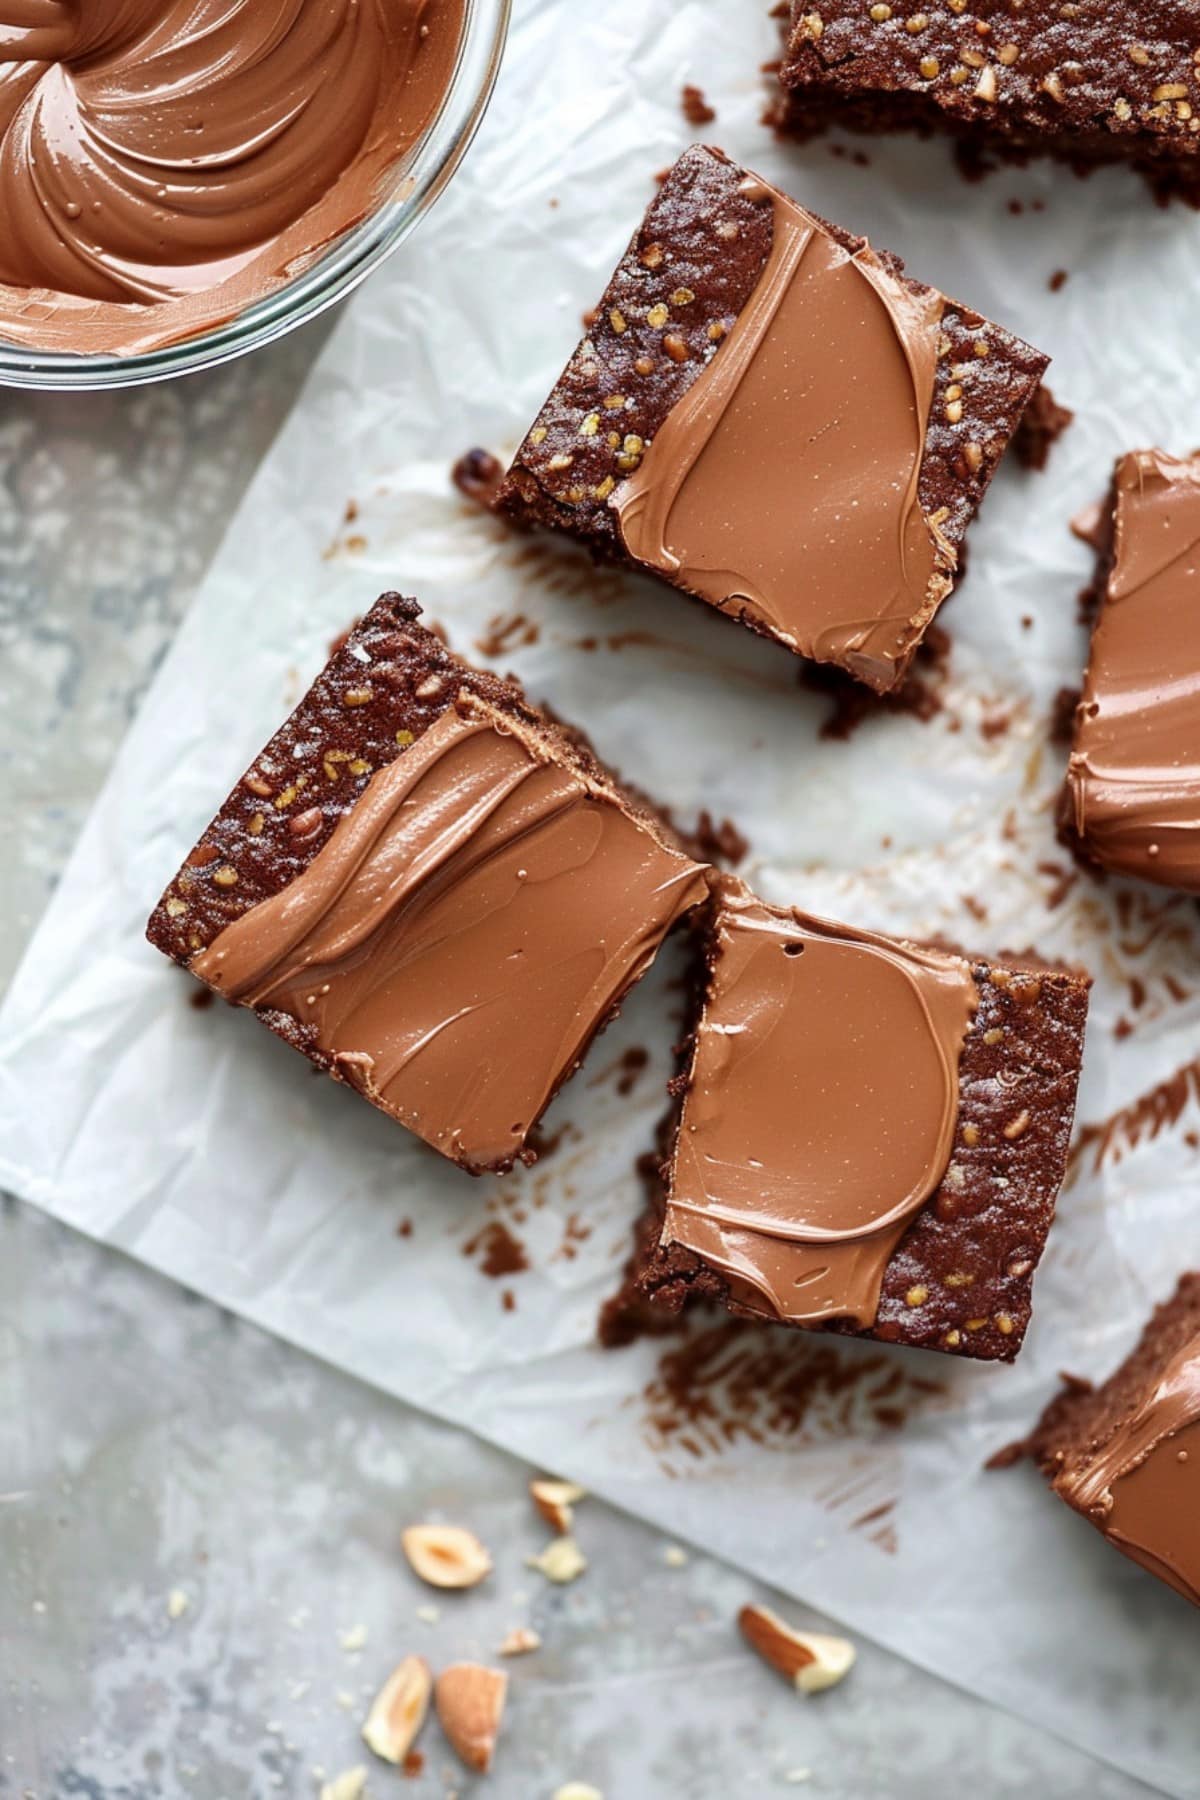 Slices of heavenly no-bake brownies with nuts, topped with chocolate ganache